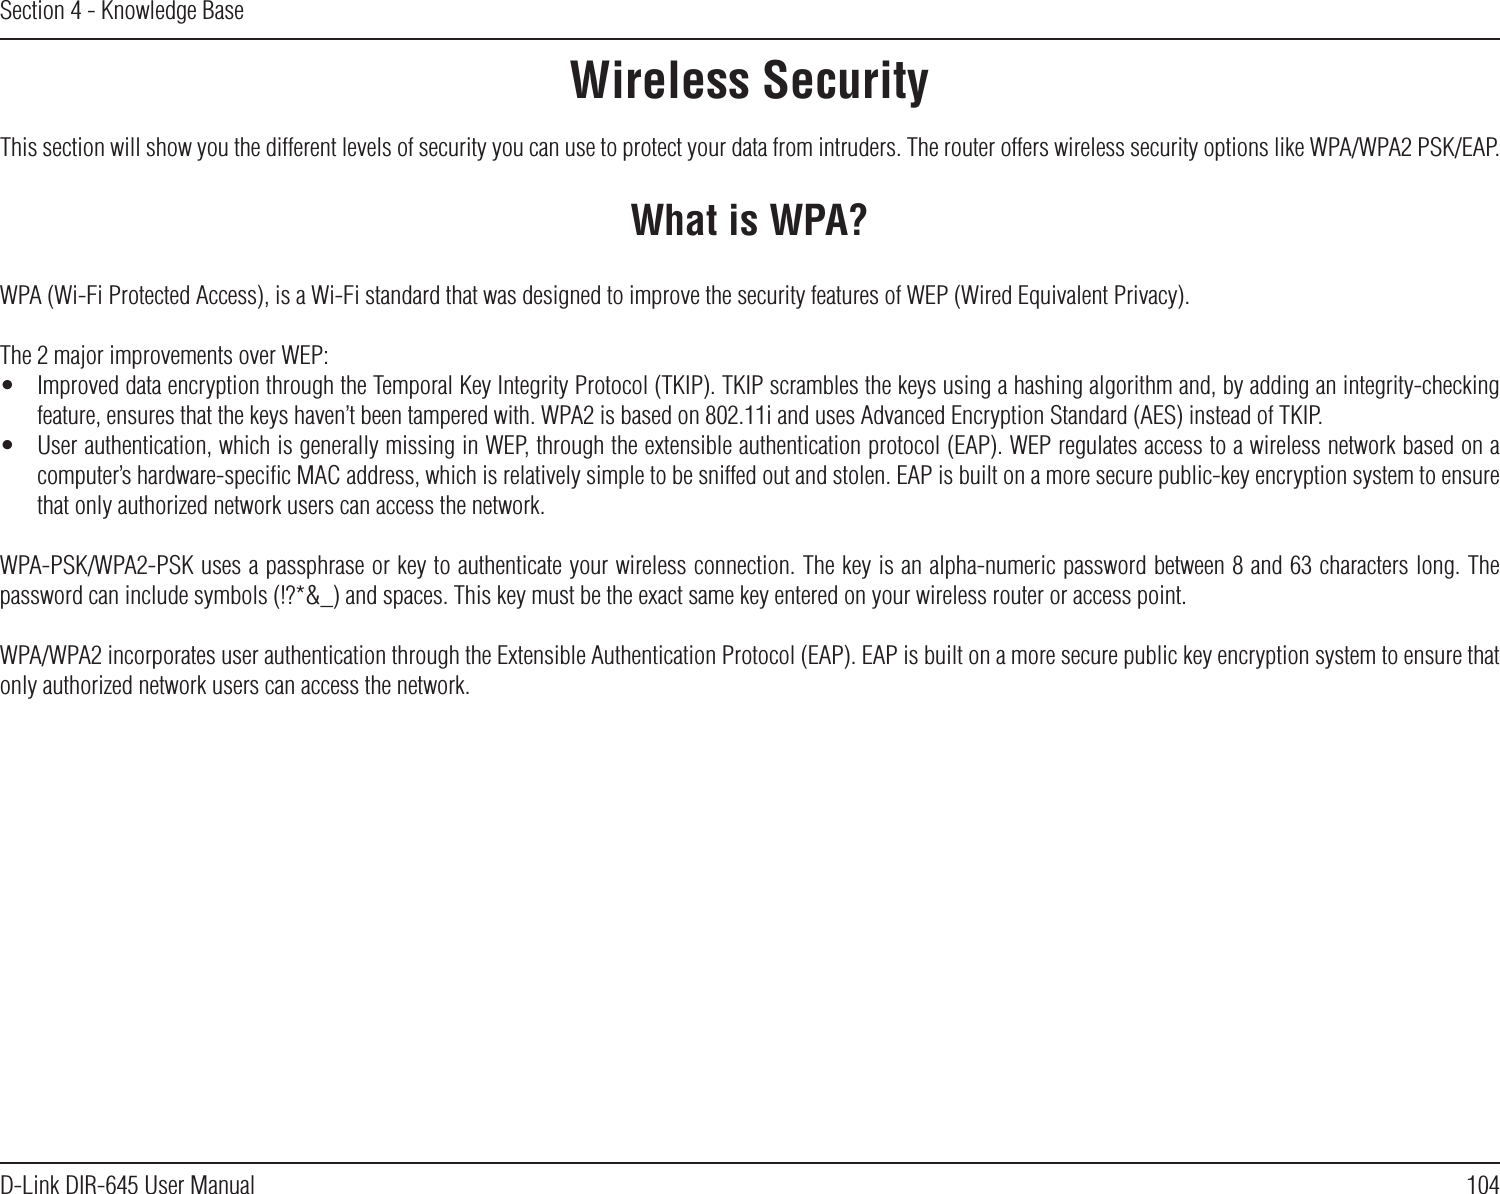 104D-Link DIR-645 User ManualSection 4 - Knowledge BaseWireless SecurityThis section will show you the different levels of security you can use to protect your data from intruders. The router offers wireless security options like WPA/WPA2 PSK/EAP.What is WPA?WPA (Wi-Fi Protected Access), is a Wi-Fi standard that was designed to improve the security features of WEP (Wired Equivalent Privacy).The 2 major improvements over WEP:•  Improved data encryption through the Temporal Key Integrity Protocol (TKIP). TKIP scrambles the keys using a hashing algorithm and, by adding an integrity-checking feature, ensures that the keys haven’t been tampered with. WPA2 is based on 802.11i and uses Advanced Encryption Standard (AES) instead of TKIP.•  User authentication, which is generally missing in WEP, through the extensible authentication protocol (EAP). WEP regulates access to a wireless network based on a computer’s hardware-speciﬁc MAC address, which is relatively simple to be sniffed out and stolen. EAP is built on a more secure public-key encryption system to ensure that only authorized network users can access the network.WPA-PSK/WPA2-PSK uses a passphrase or key to authenticate your wireless connection. The key is an alpha-numeric password between 8 and 63 characters long. The password can include symbols (!?*&amp;_) and spaces. This key must be the exact same key entered on your wireless router or access point.WPA/WPA2 incorporates user authentication through the Extensible Authentication Protocol (EAP). EAP is built on a more secure public key encryption system to ensure that only authorized network users can access the network.